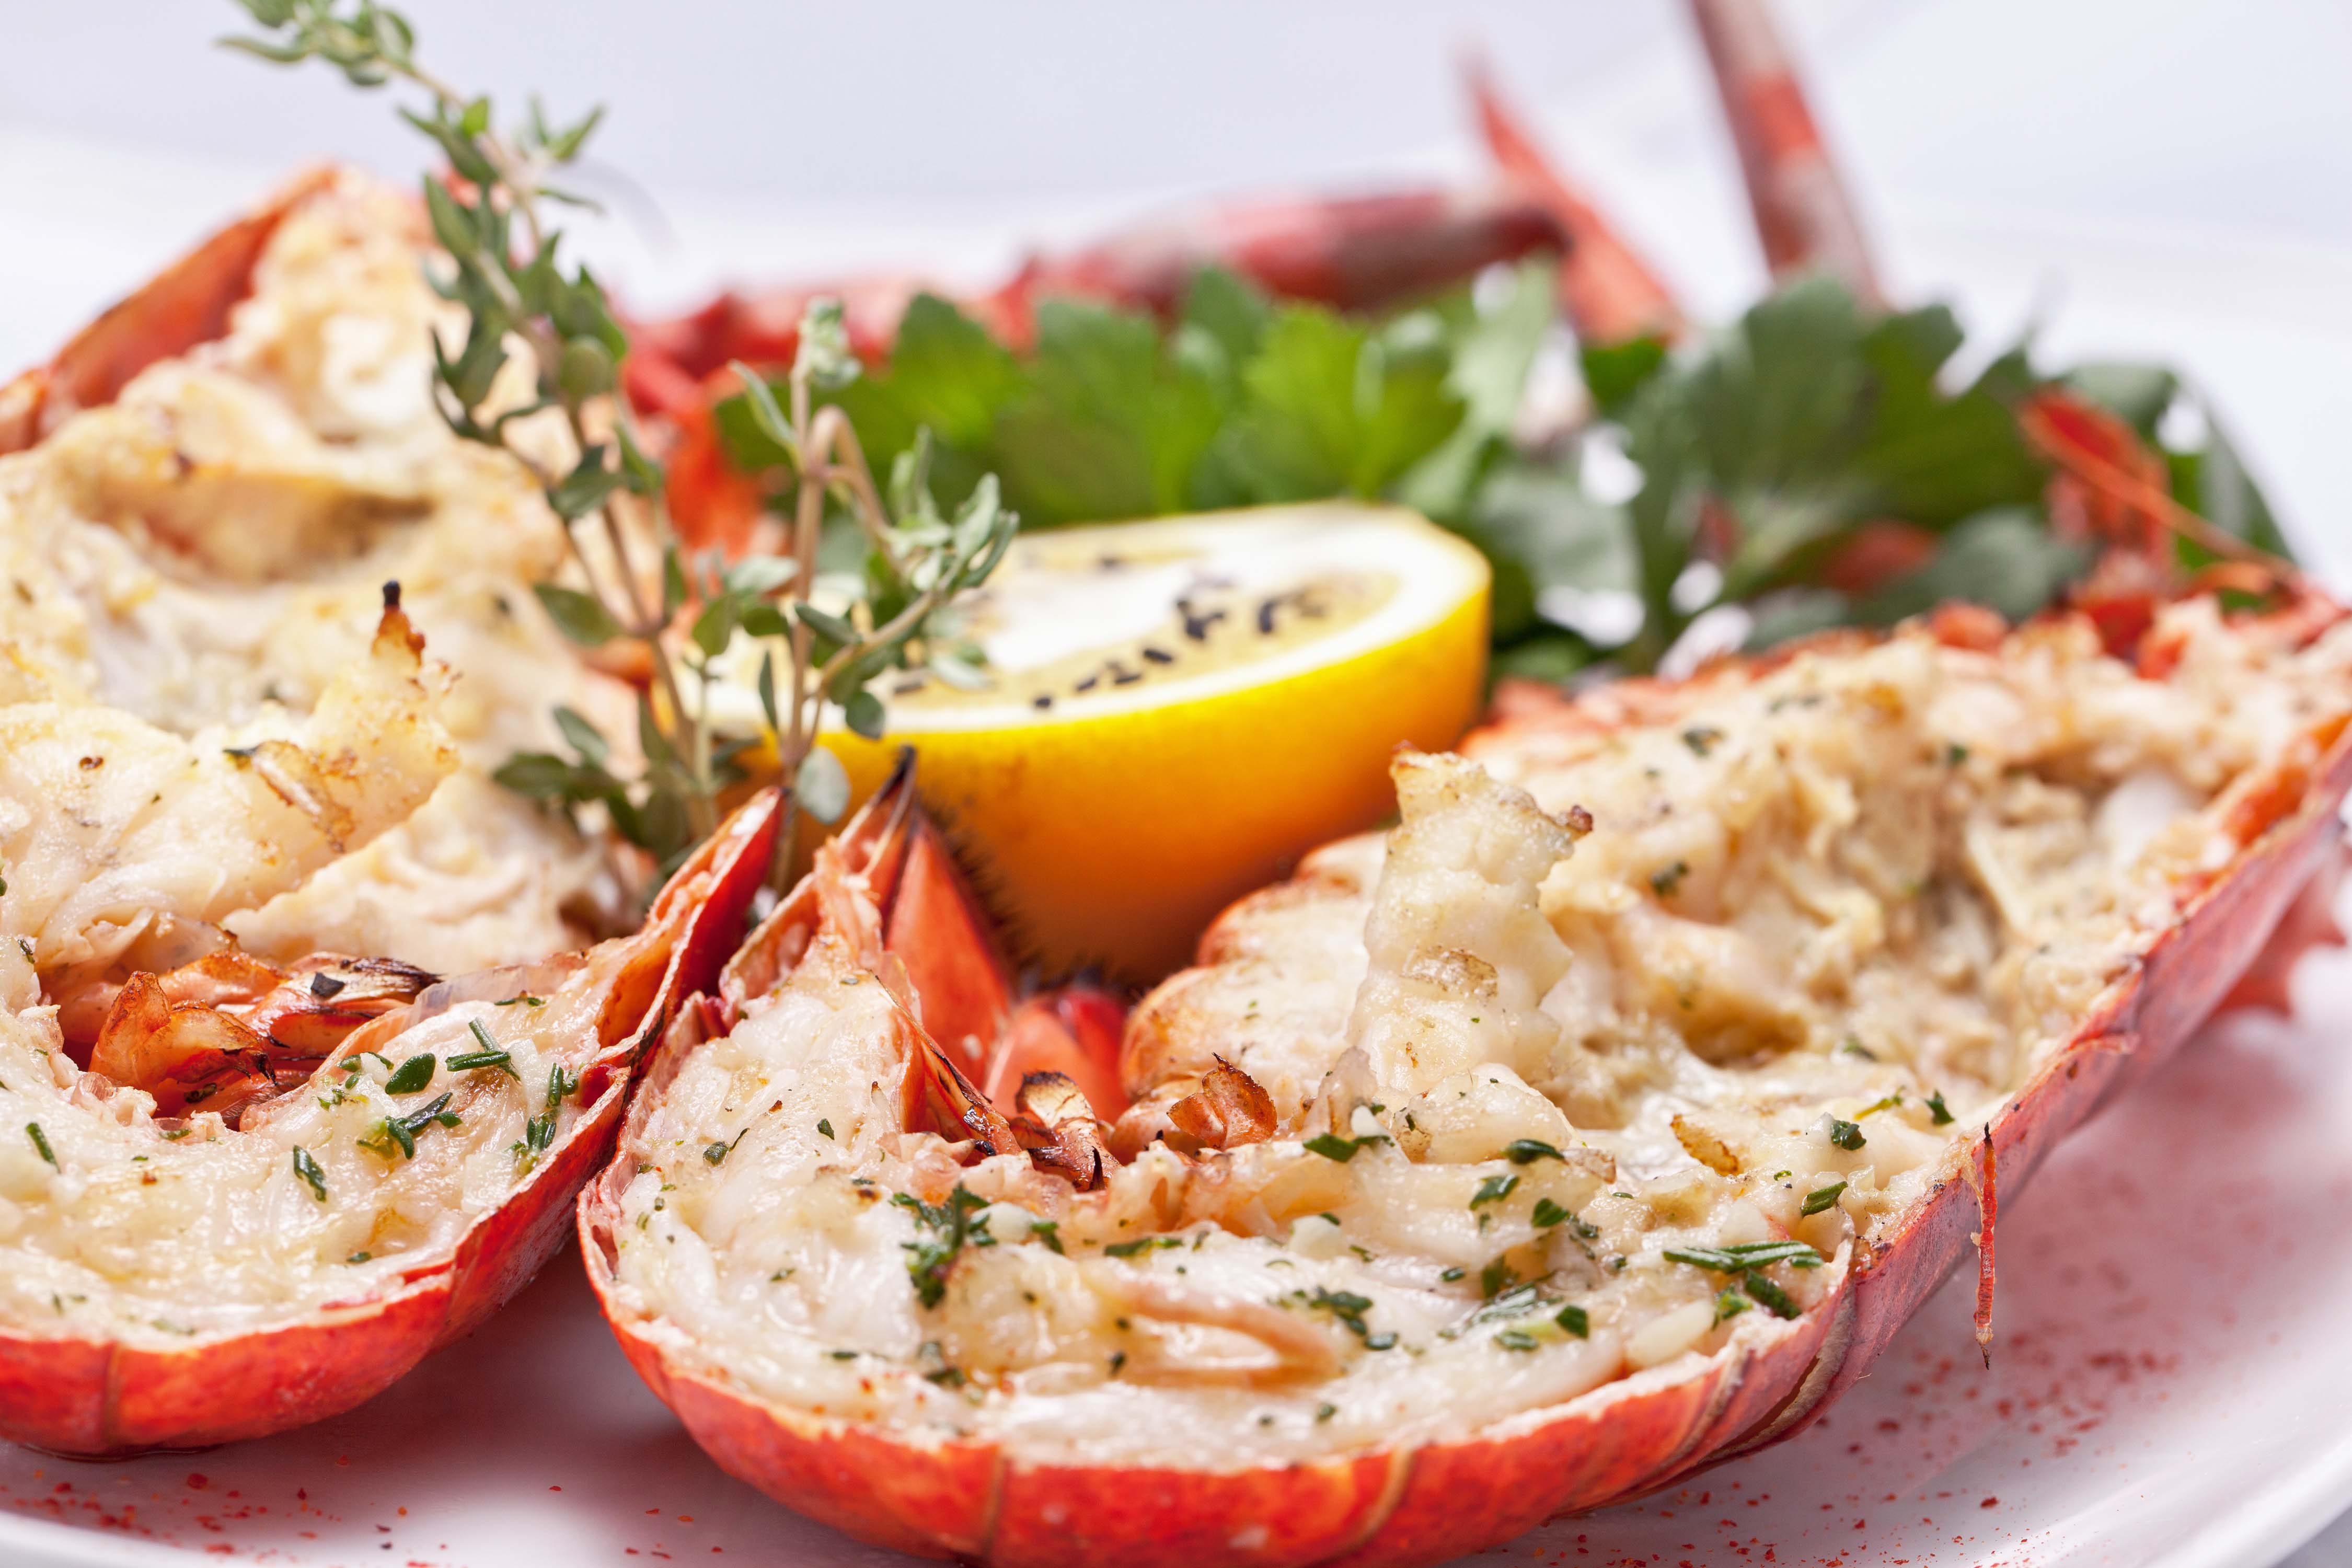 Rate These 15 Foods and We’ll Reveal If You’re More Shy or Outgoing baked stuffed lobster